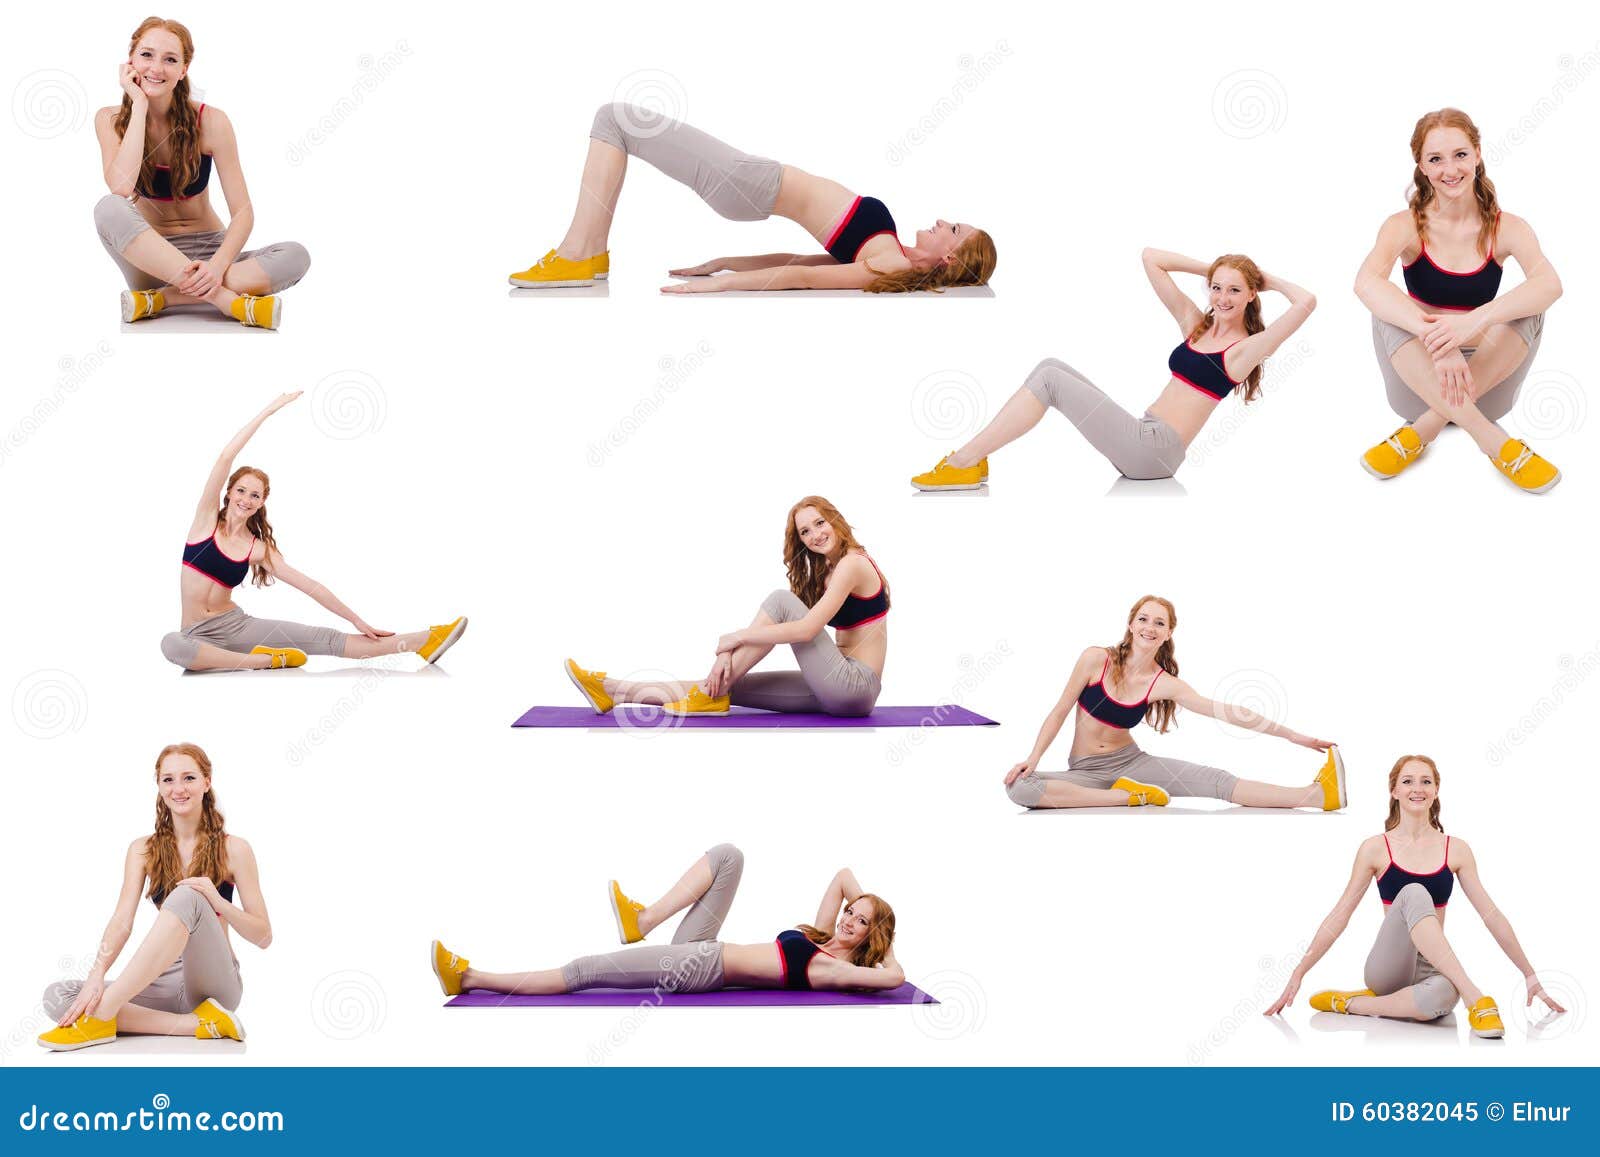 Concept Of Healthy Lifestyle In Set Stock Photo - Image: 60382045